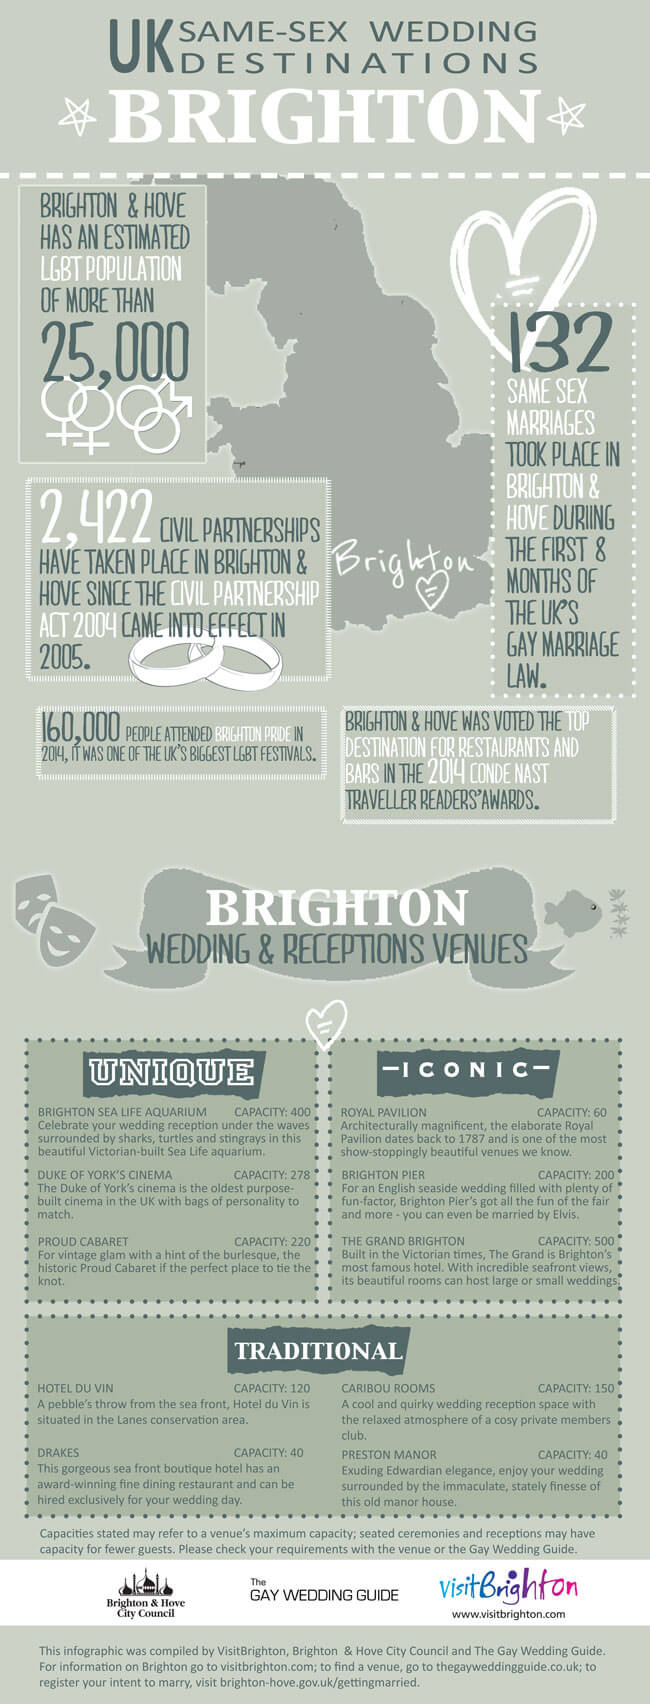 A4-GWG-BRIGHTON-VENUES-INFOGRAPHIC-FINAL-ALL